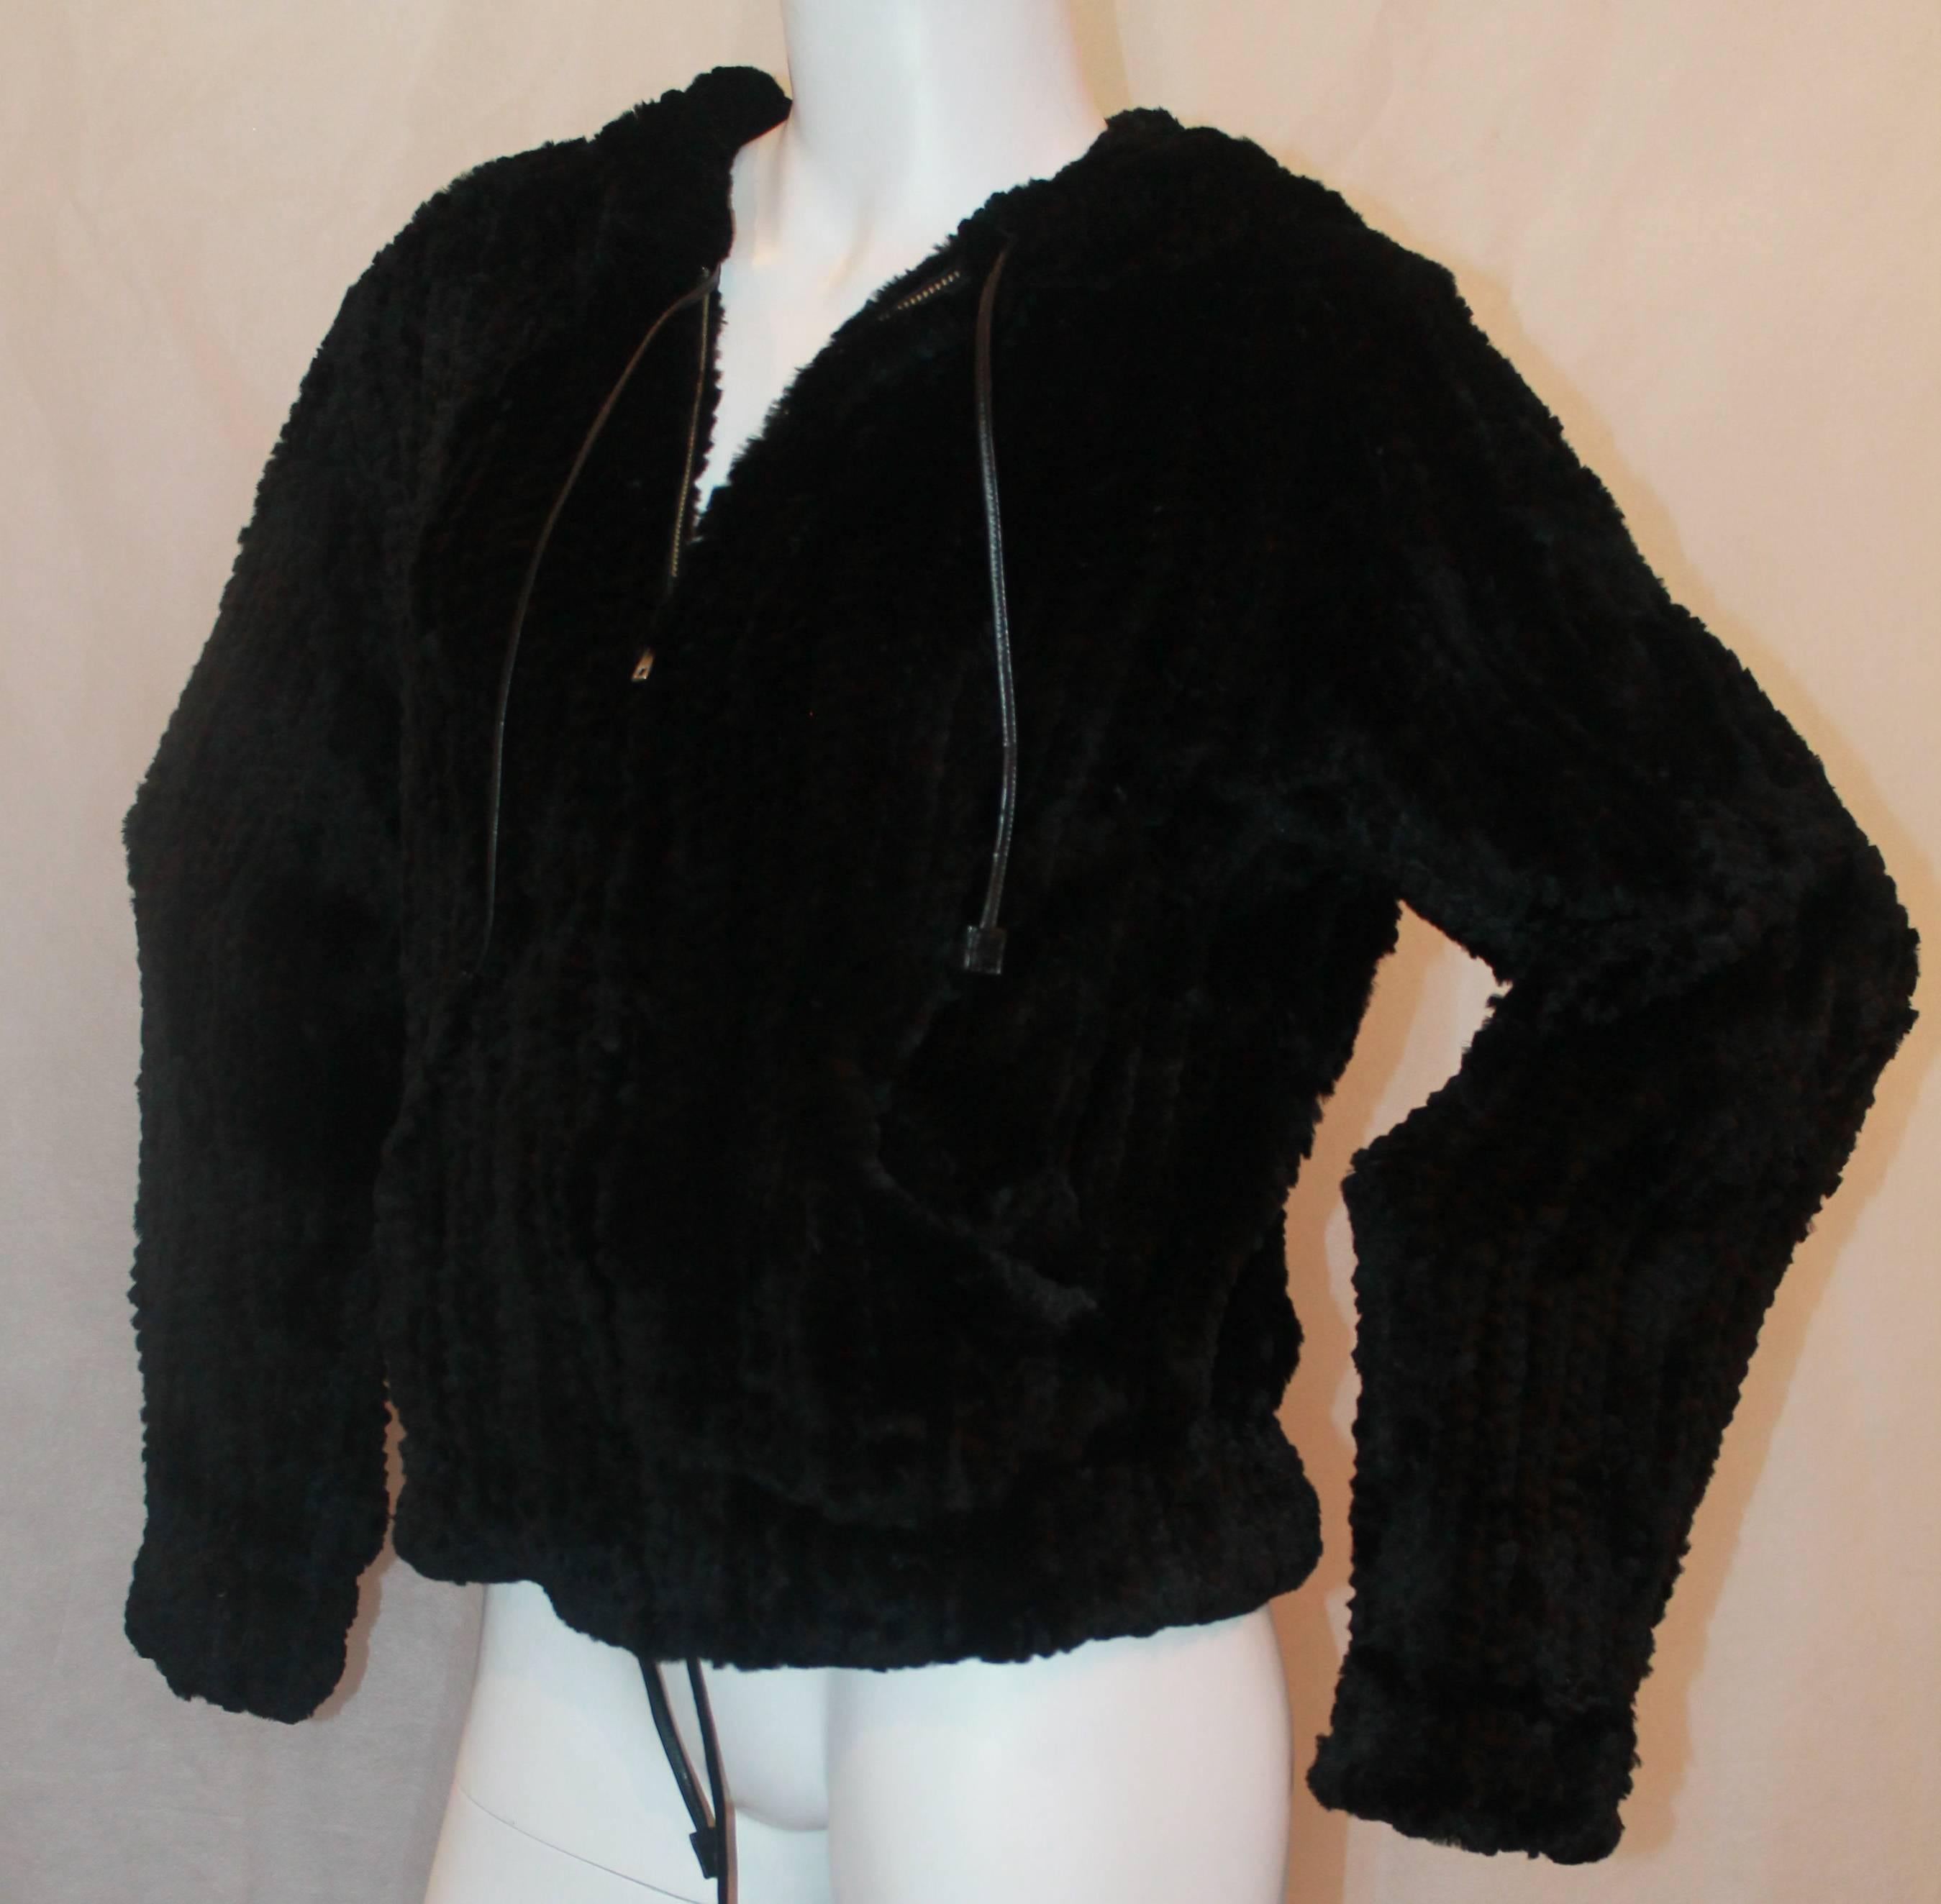 Sonia Rykiel Black Rabbit Knit Fur Zip Up Jacket w/ Hood - Medium - Circa 90's.  This beautiful piece is in excellent condition.  It features extremely soft rabbit fur and leather drawstrings on the hood and bottom to cinch it.  It has two